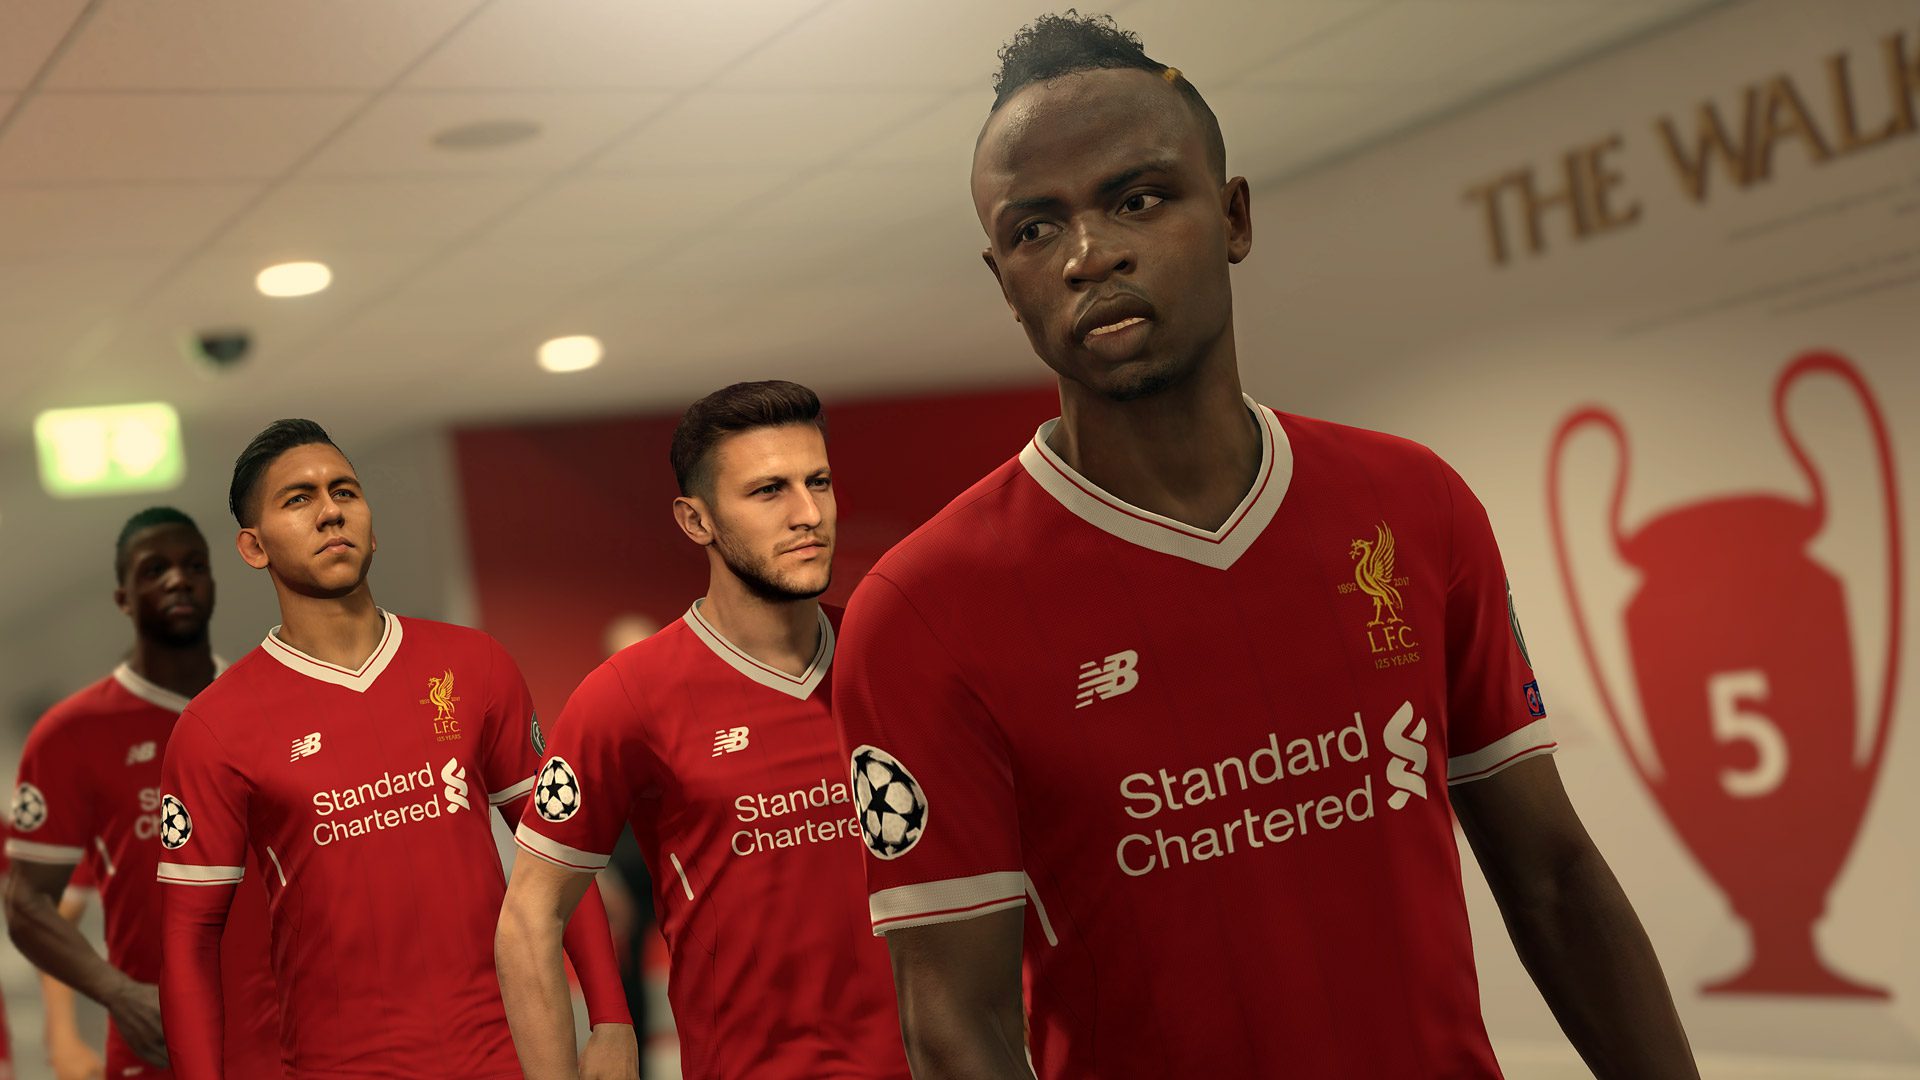 REVIEW : Pro Evolution Soccer 2018 (PS4/ PS4 Pro)